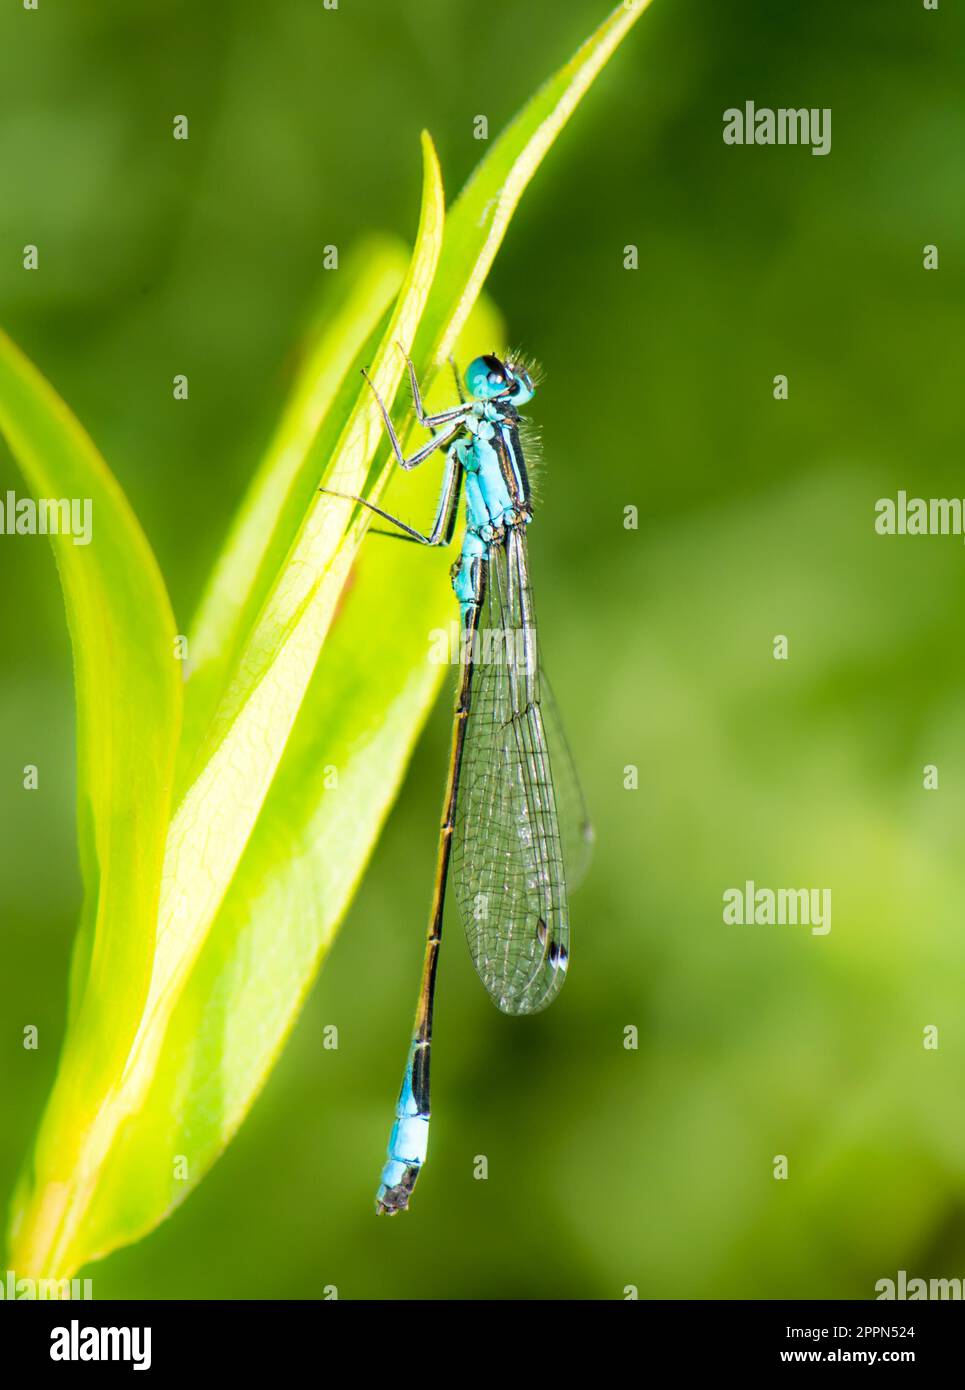 Macro of a bluetail damselfly on a green leaf Stock Photo